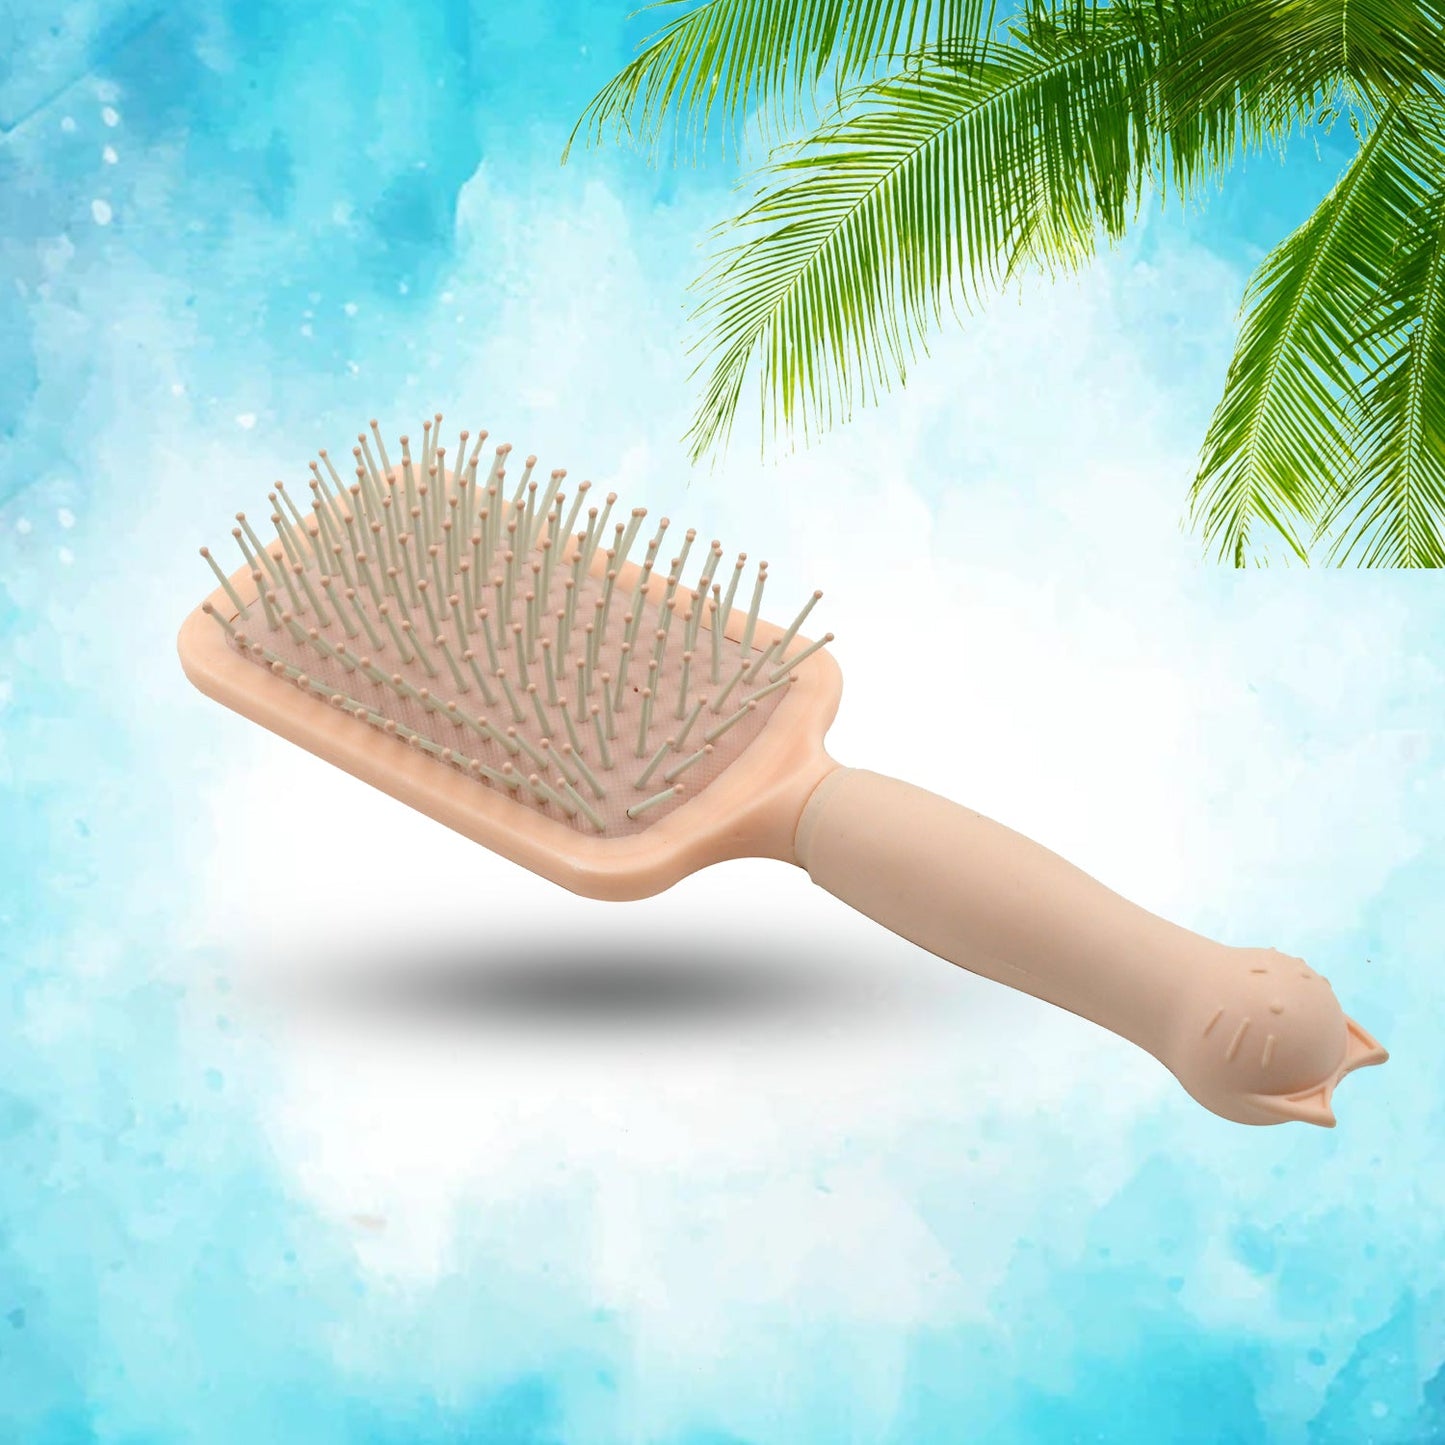 12547 Massage Comb, Massage Hair Brush Ergonomic Matt Disappointment for Straight Curly Hair Cushion Curly Hair Comb For Detangling Professional Comb For Men And Women for All Hair Types, Home Salon DIY Hairdressing Tool  (1 Pc / 24 Cm)